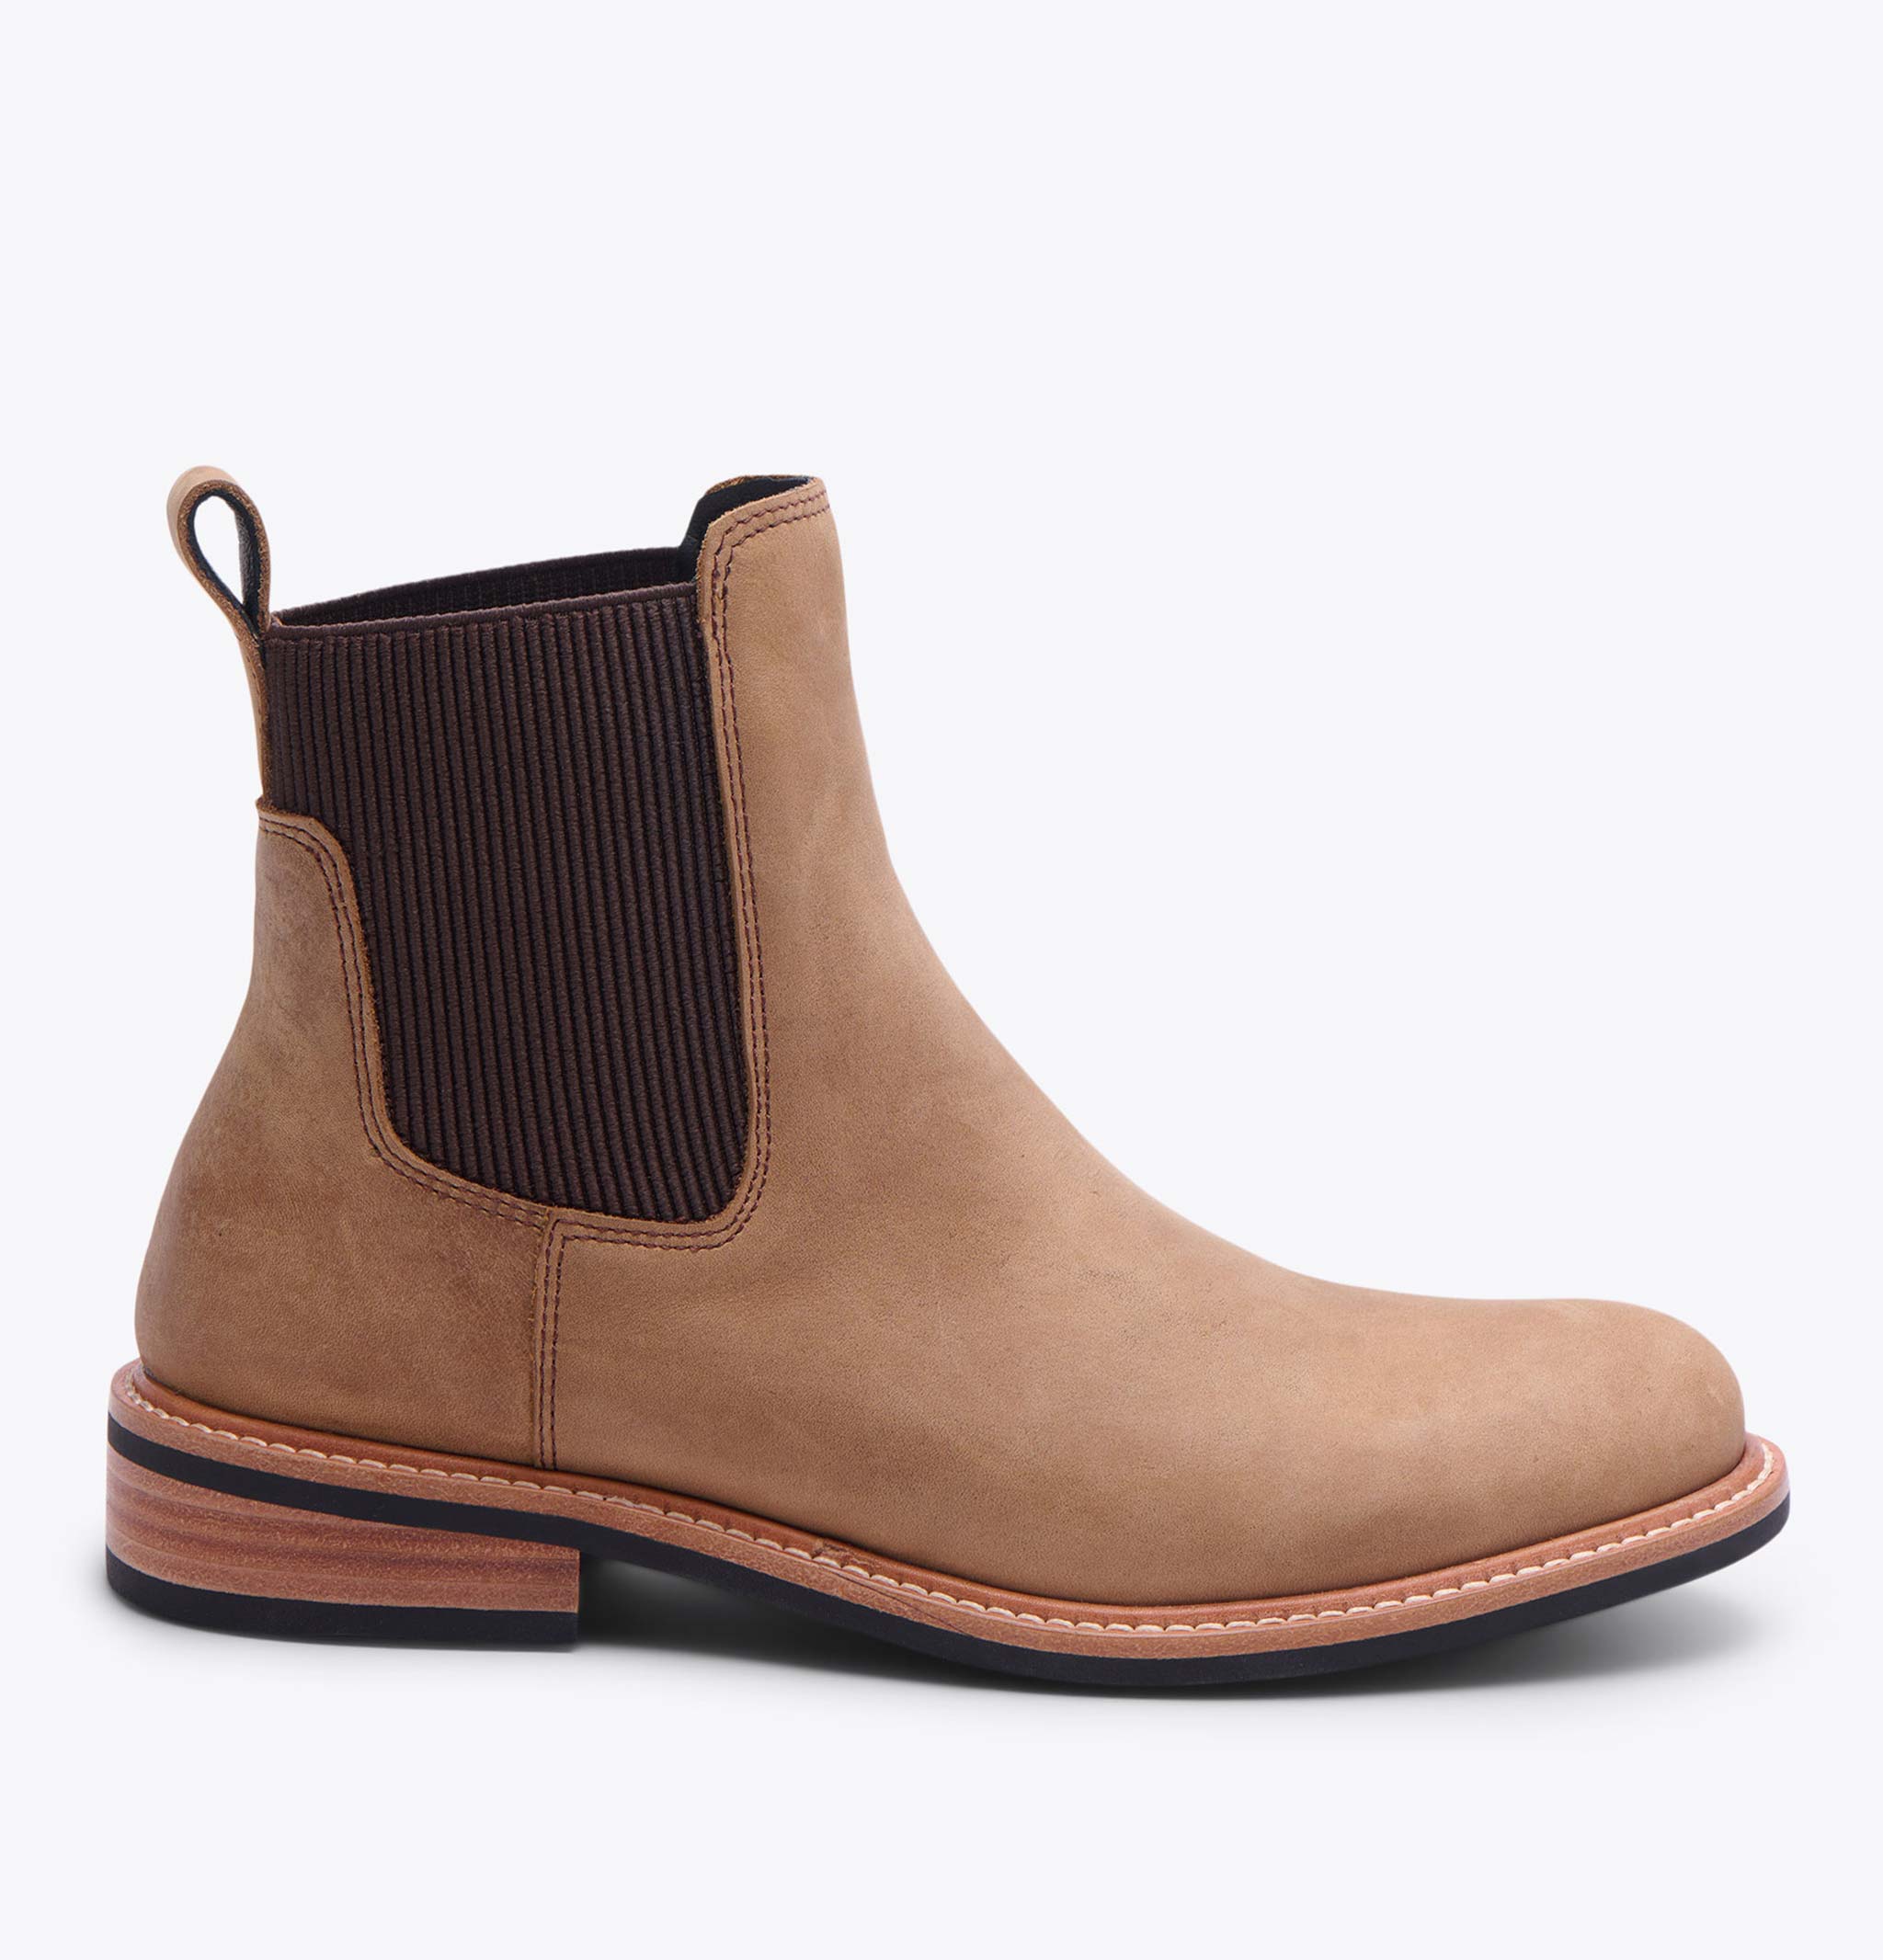 Nisolo Carmen Chelsea Boot Tobacco - Every Nisolo product is built on the foundation of comfort, function, and design. 